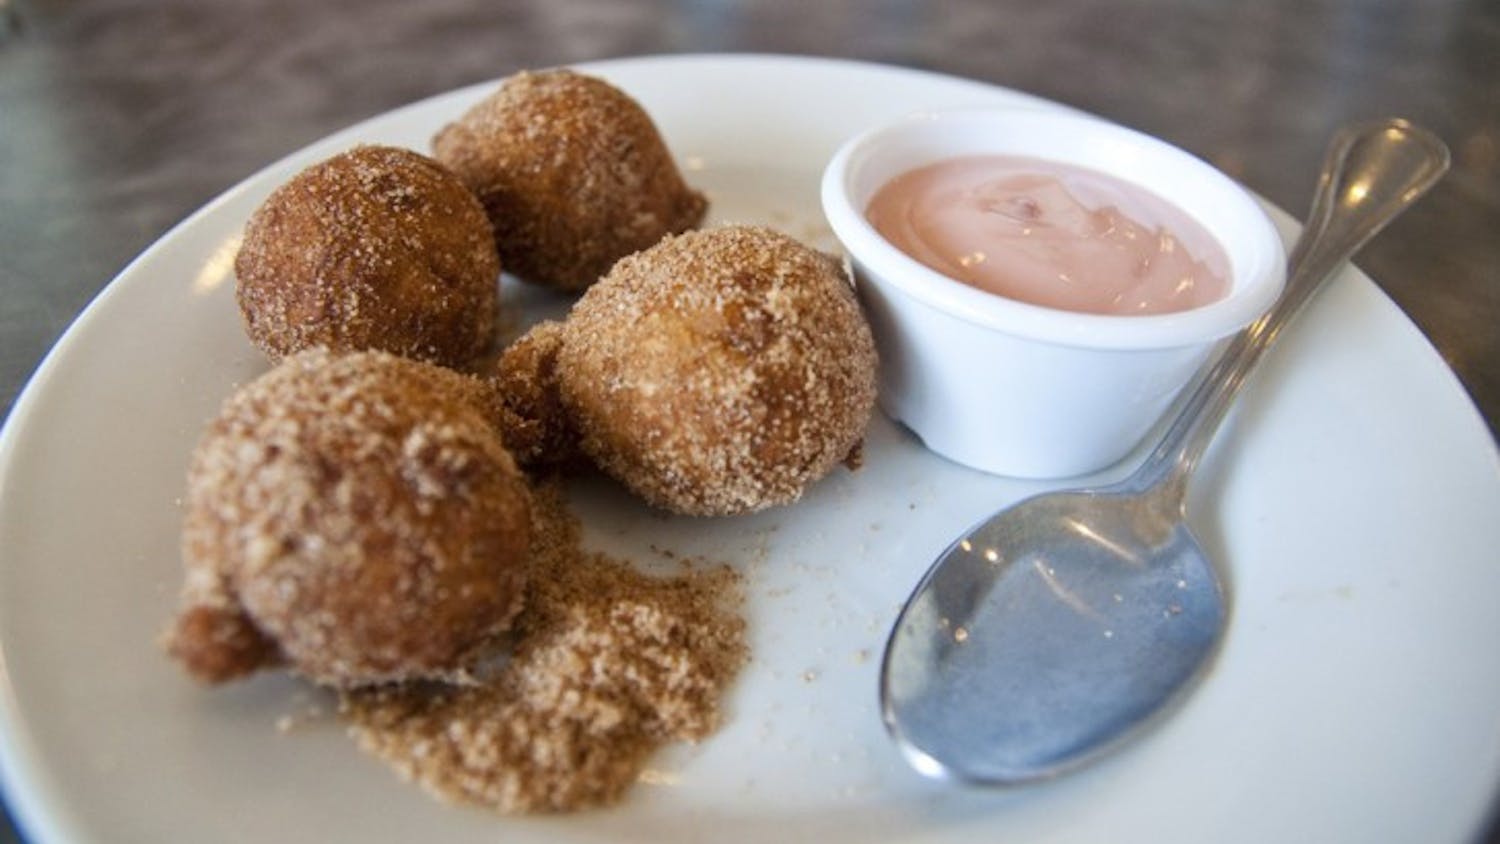 The Apple Fritters at Peach Valley Cafe are brought to the table in a brown paper bag, shaken up in sugar and cinnamon and served on a plate with a yogurt dipping sauce.